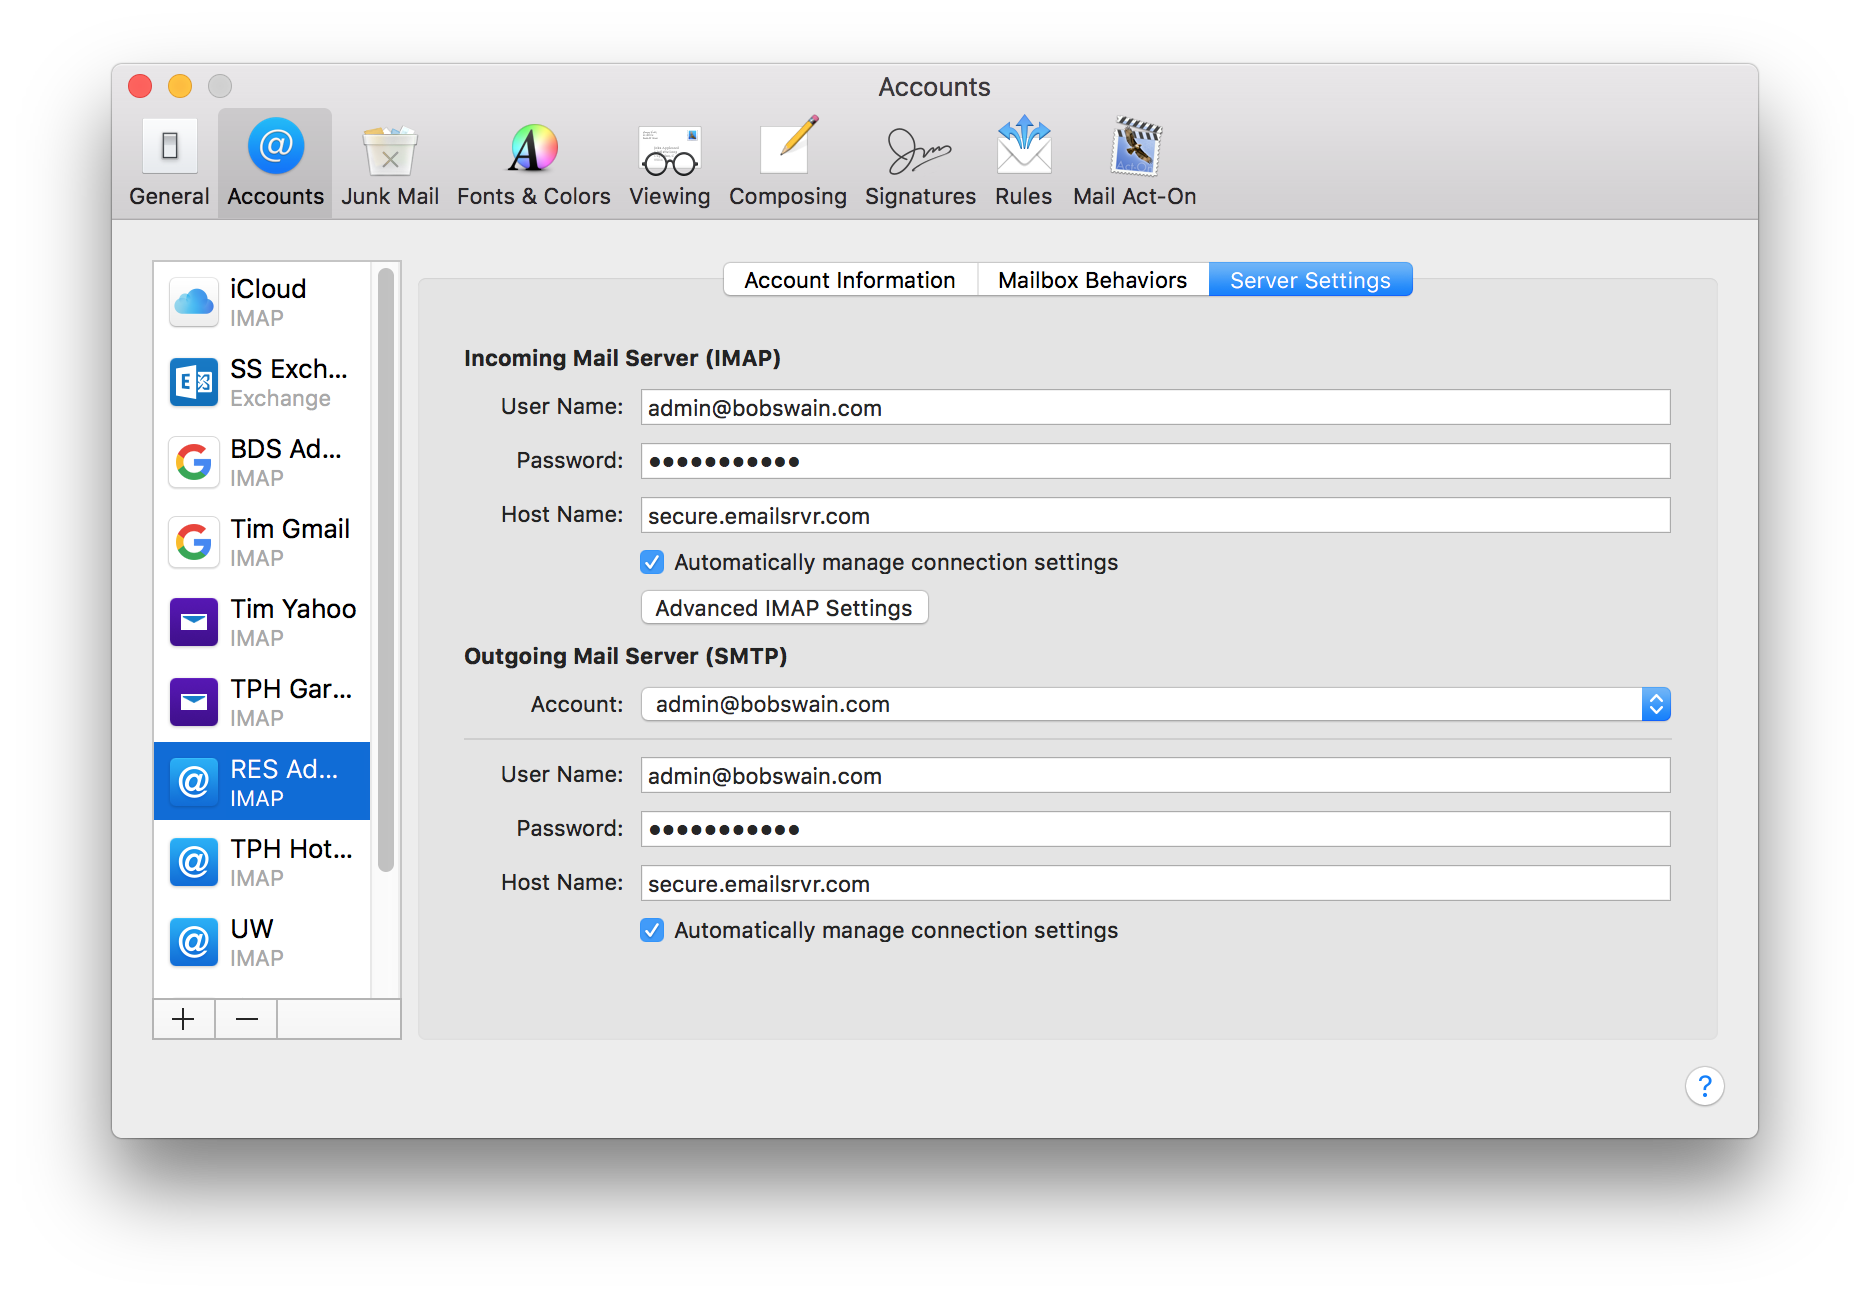 gmail server settings for mac mail